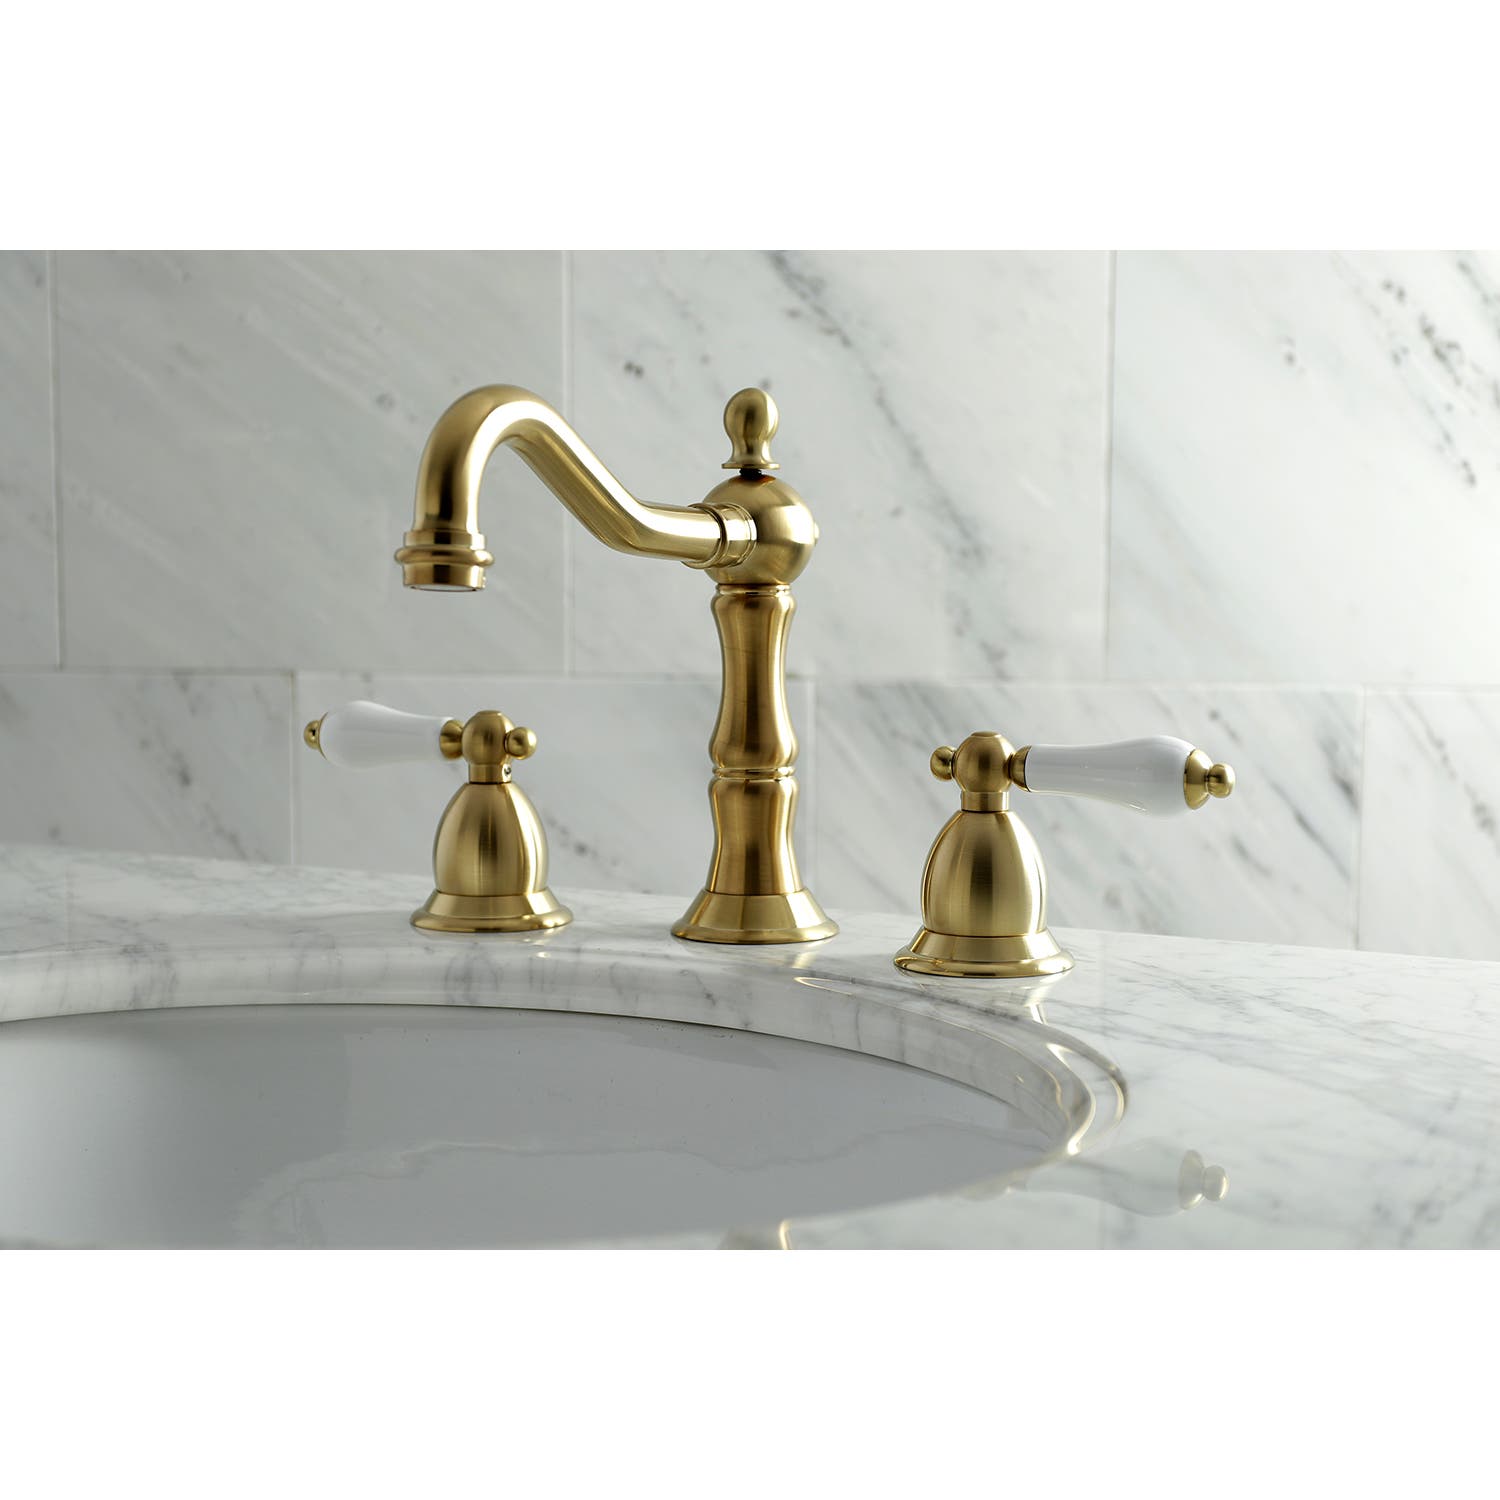 Satin Brass is the New Black with the Heritage Widespread Lavatory Satin Brass Faucet, KS1977PL